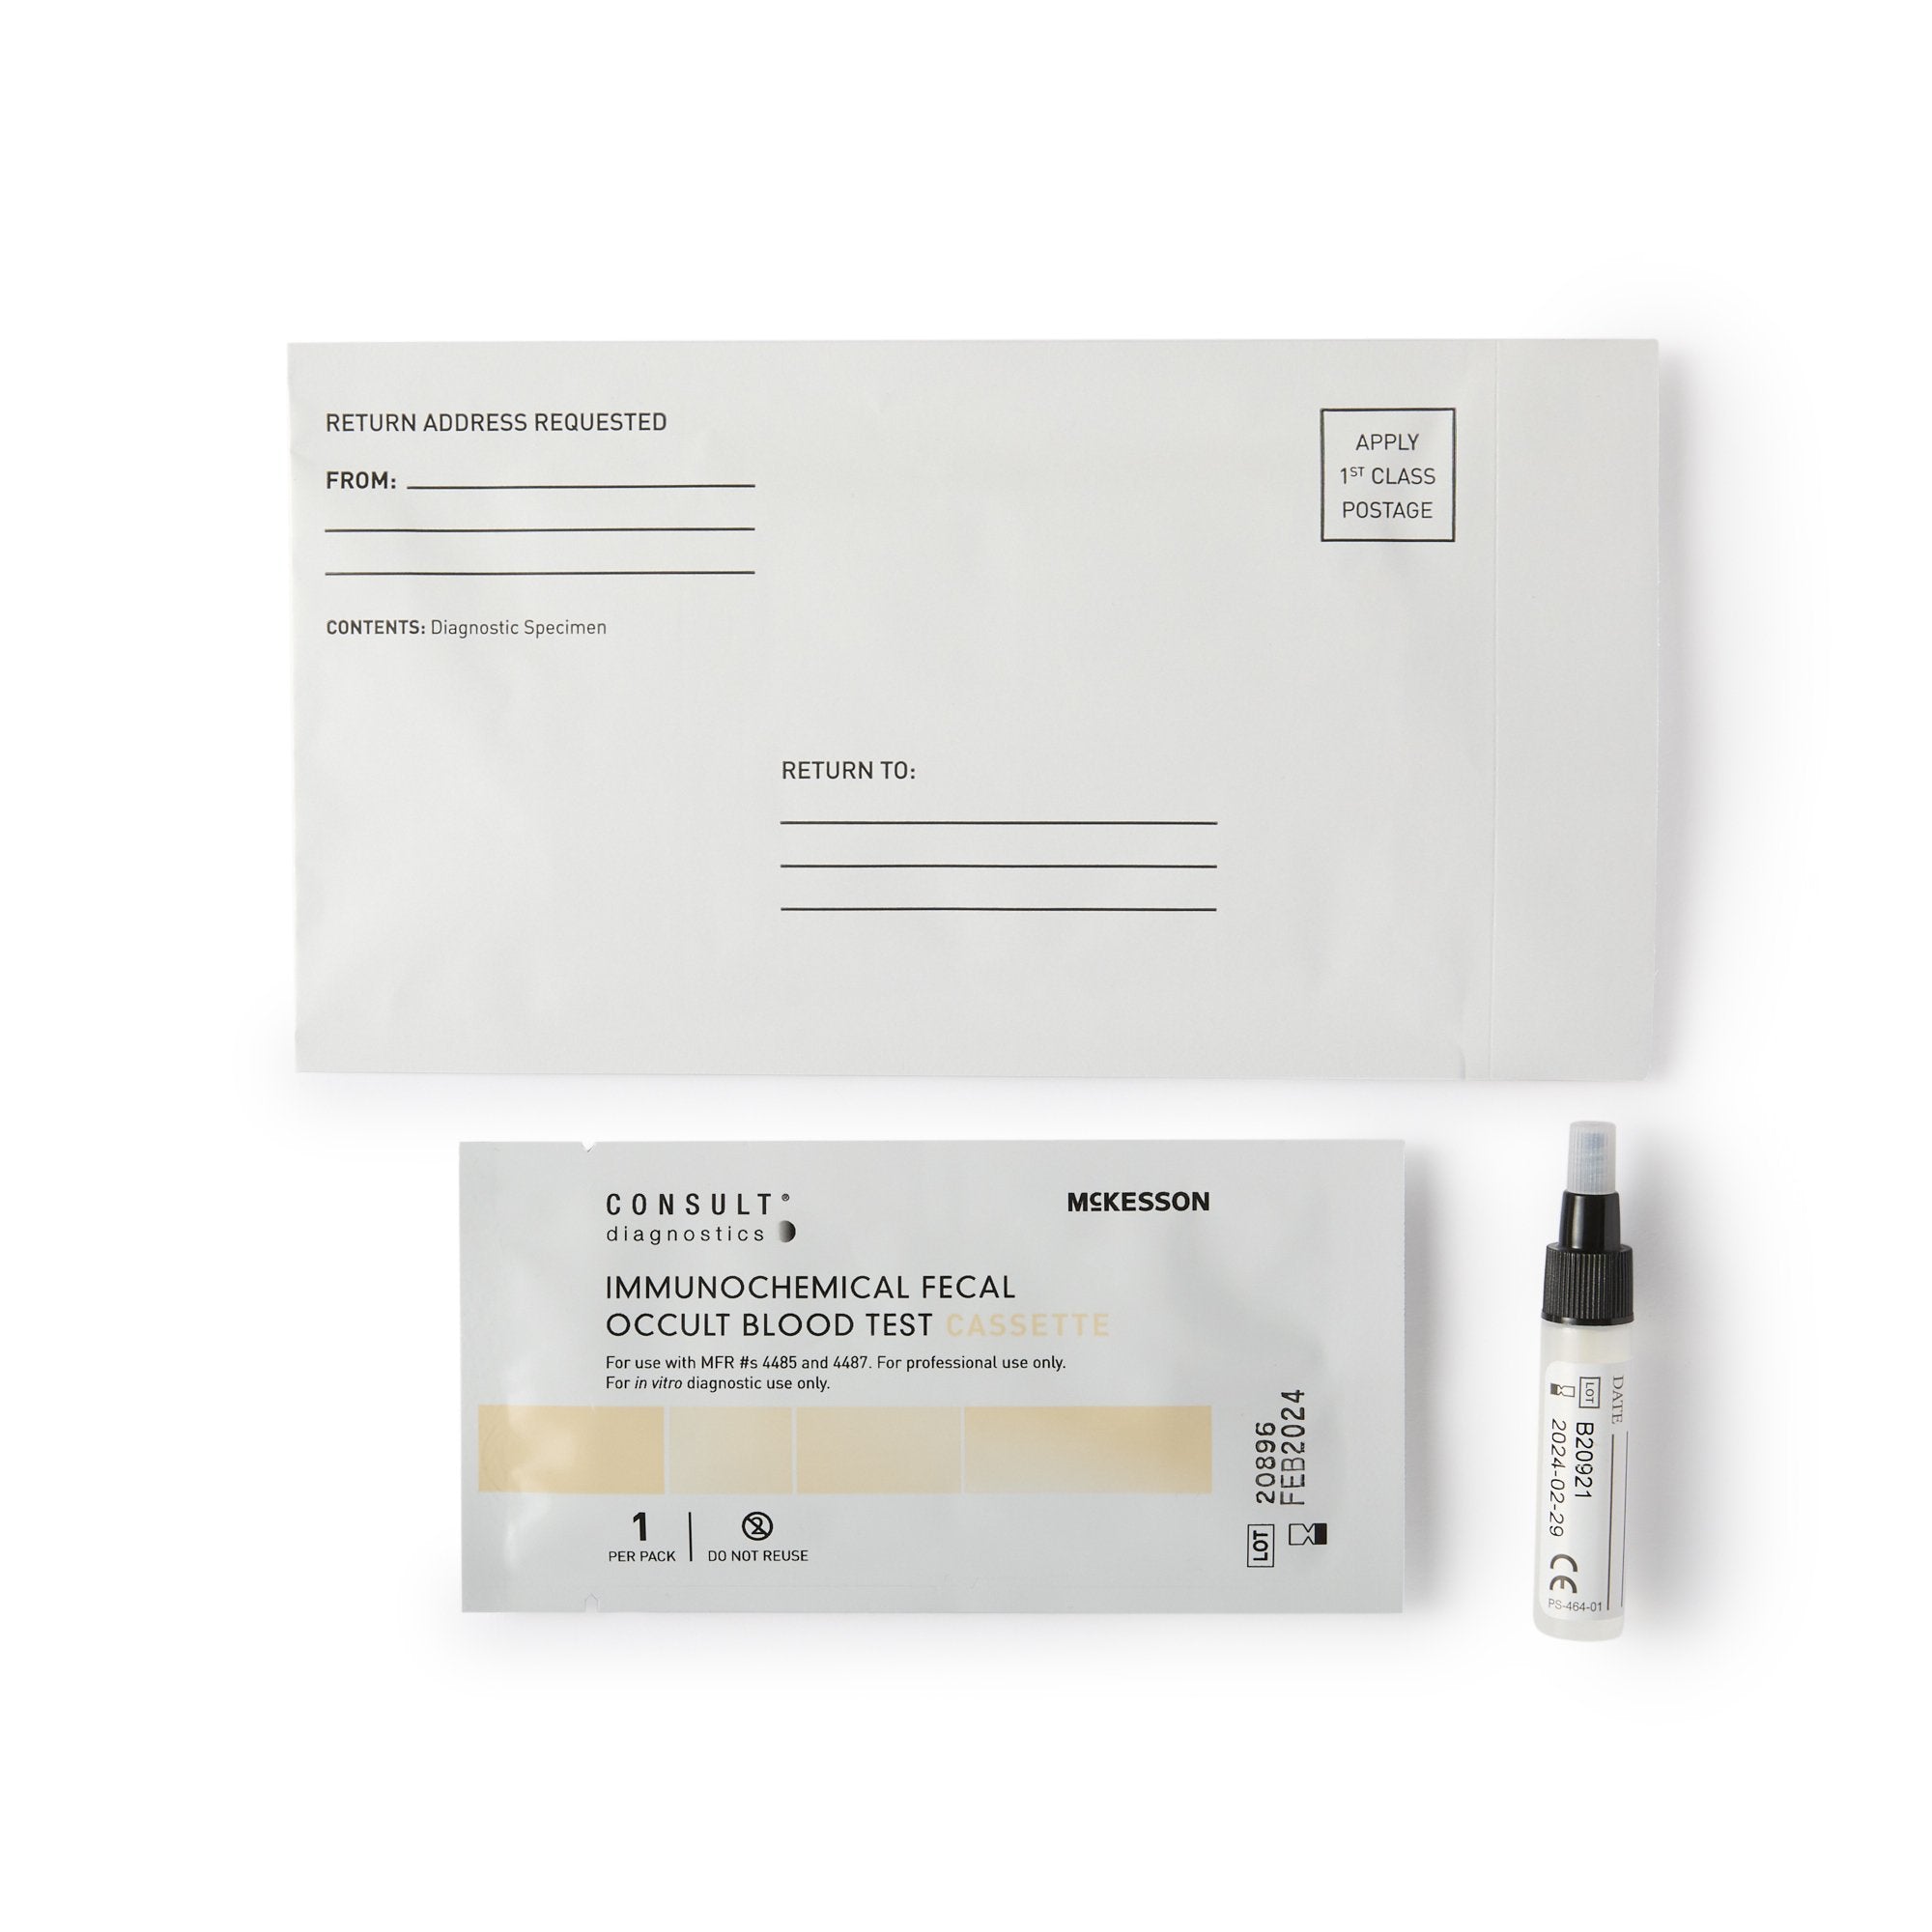 Cancer Screening Test Kit McKesson Consult Colorectal Cancer Screening Fecal Occult Blood Test (iFOB or FIT) Stool Sample 25 Tests CLIA Waived